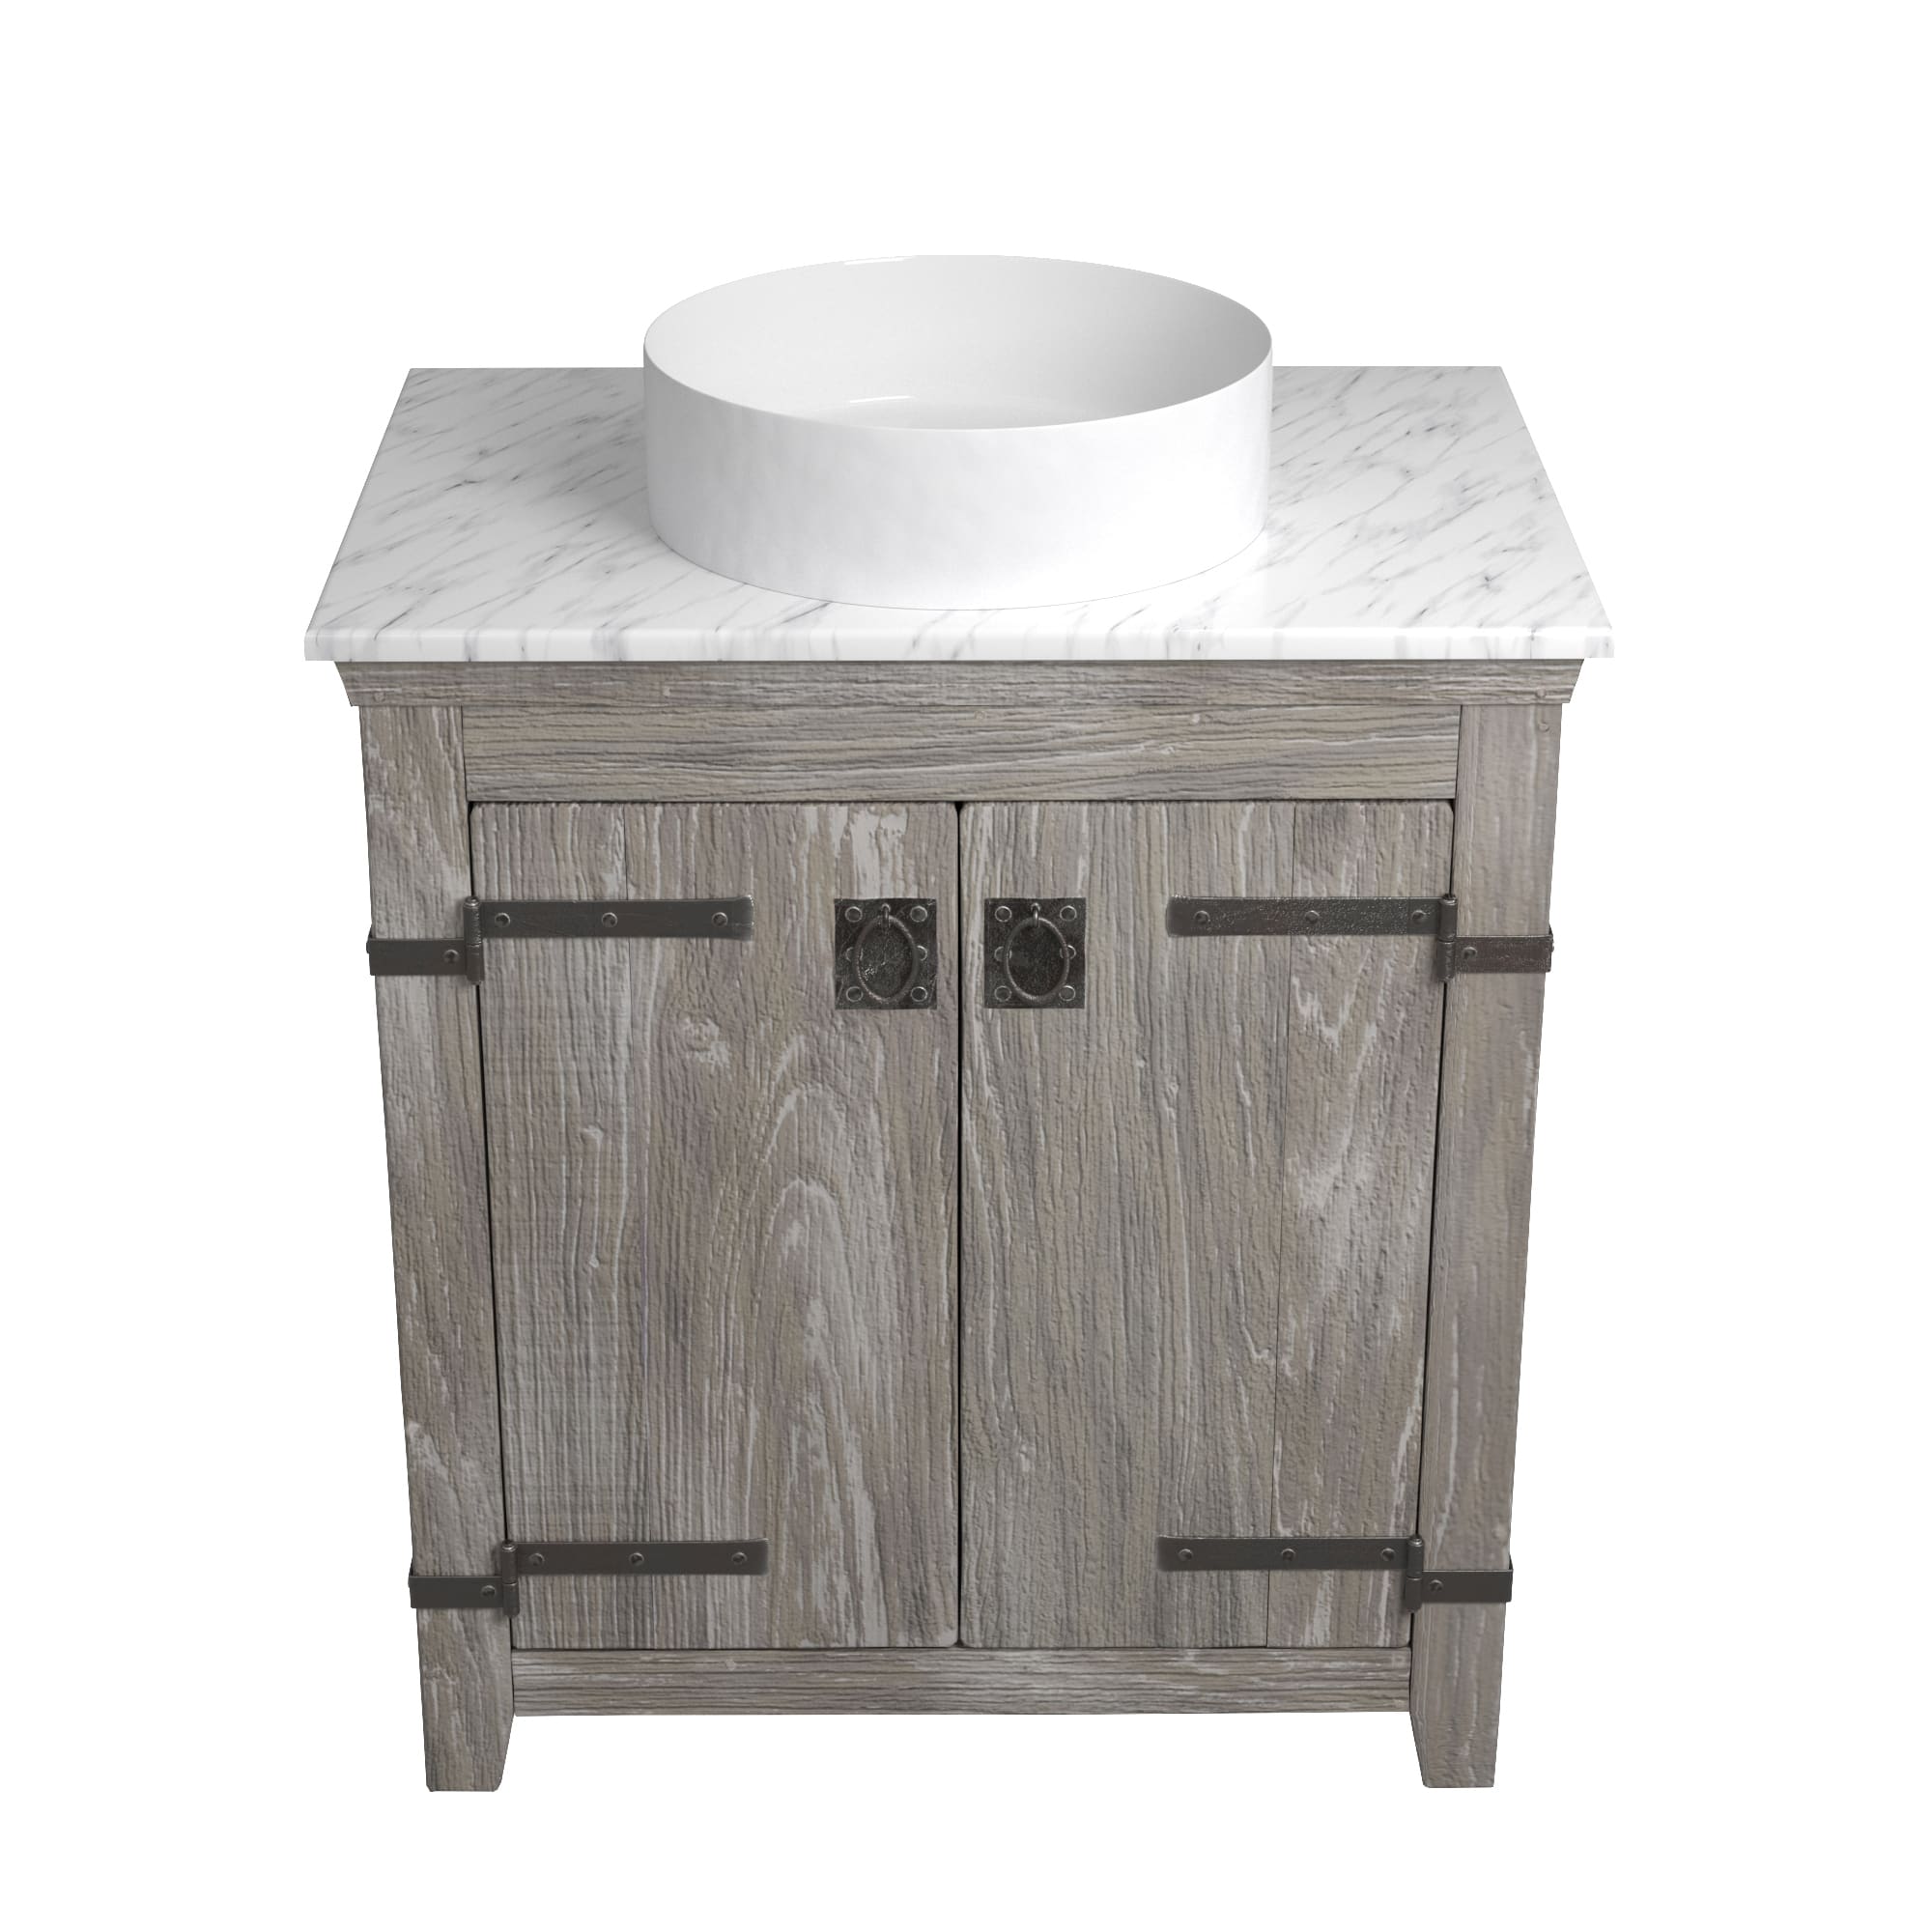 Native Trails 30" Americana Vanity in Driftwood with Carrara Marble Top and Positano in Bianco, Single Faucet Hole, BND30-VB-CT-MG-055